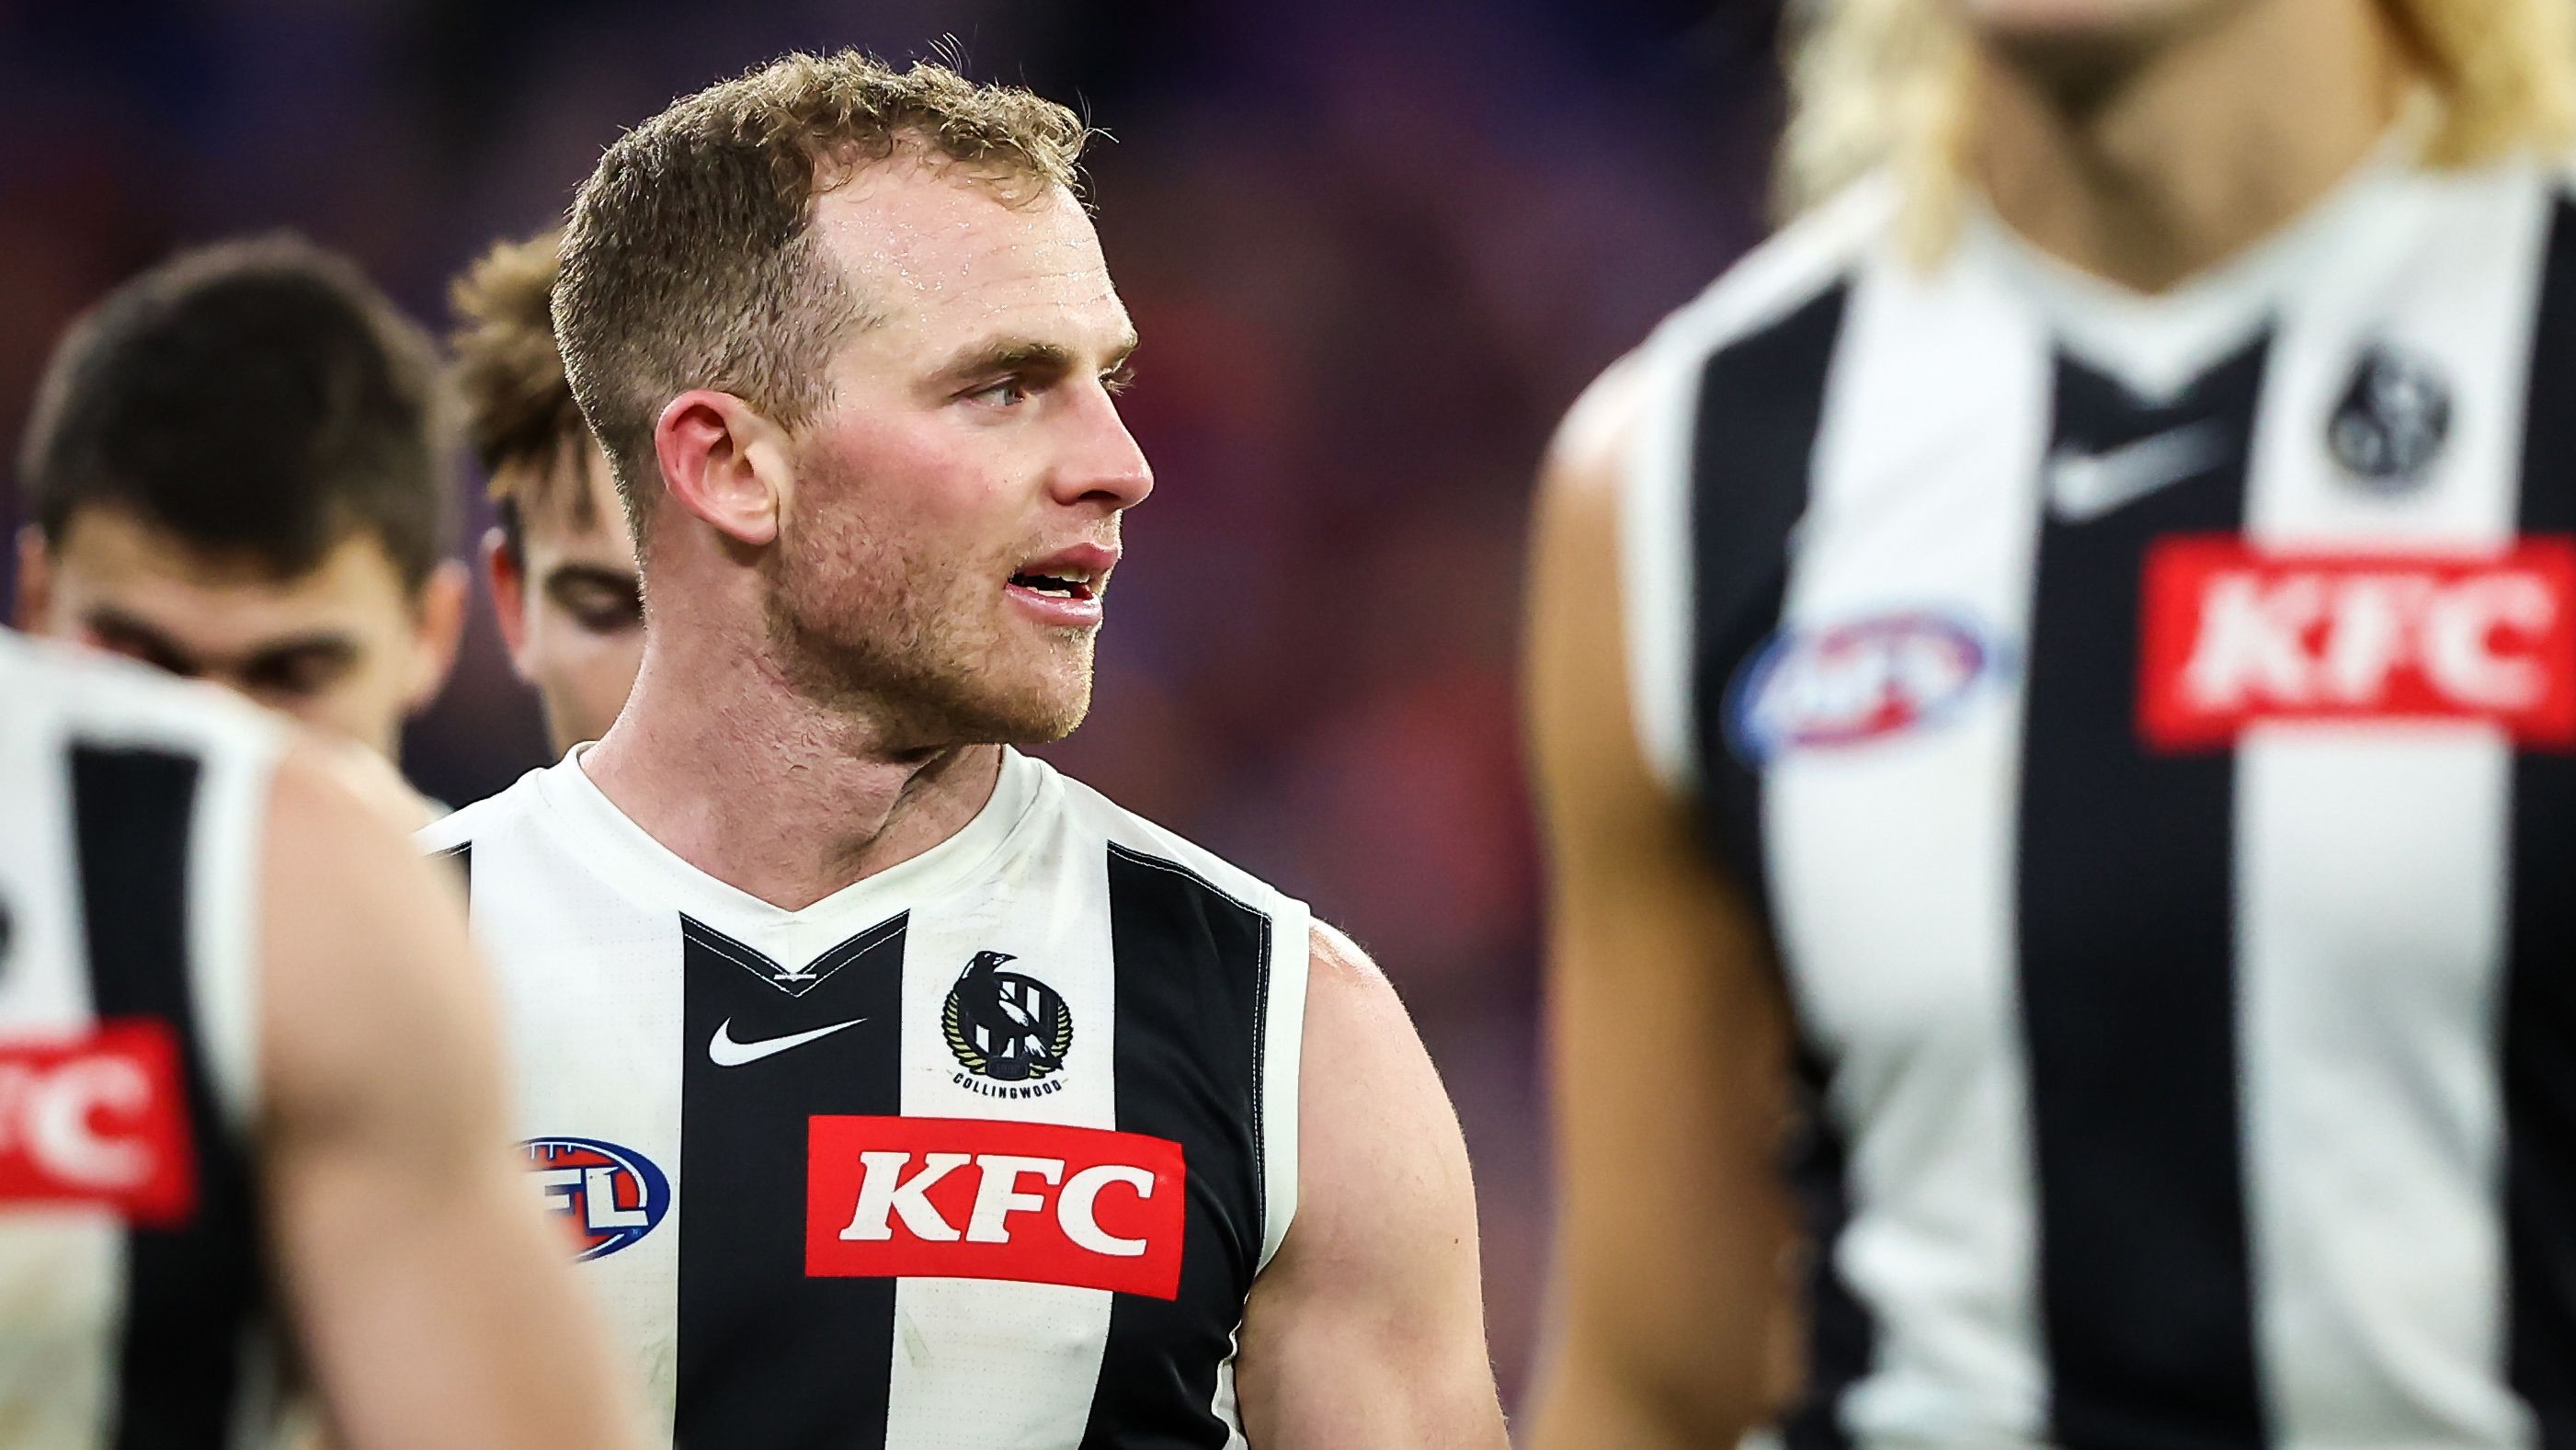 MELBOURNE, AUSTRALIA - JUNE 12: Tom Mitchell of the Magpies looks dejected after a loss during the 2023 AFL Round 13 match between the Melbourne Demons and the Collingwood Magpies at the Melbourne Cricket Ground on June 12, 2023 in Melbourne, Australia. (Photo by Dylan Burns/AFL Photos via Getty Images)